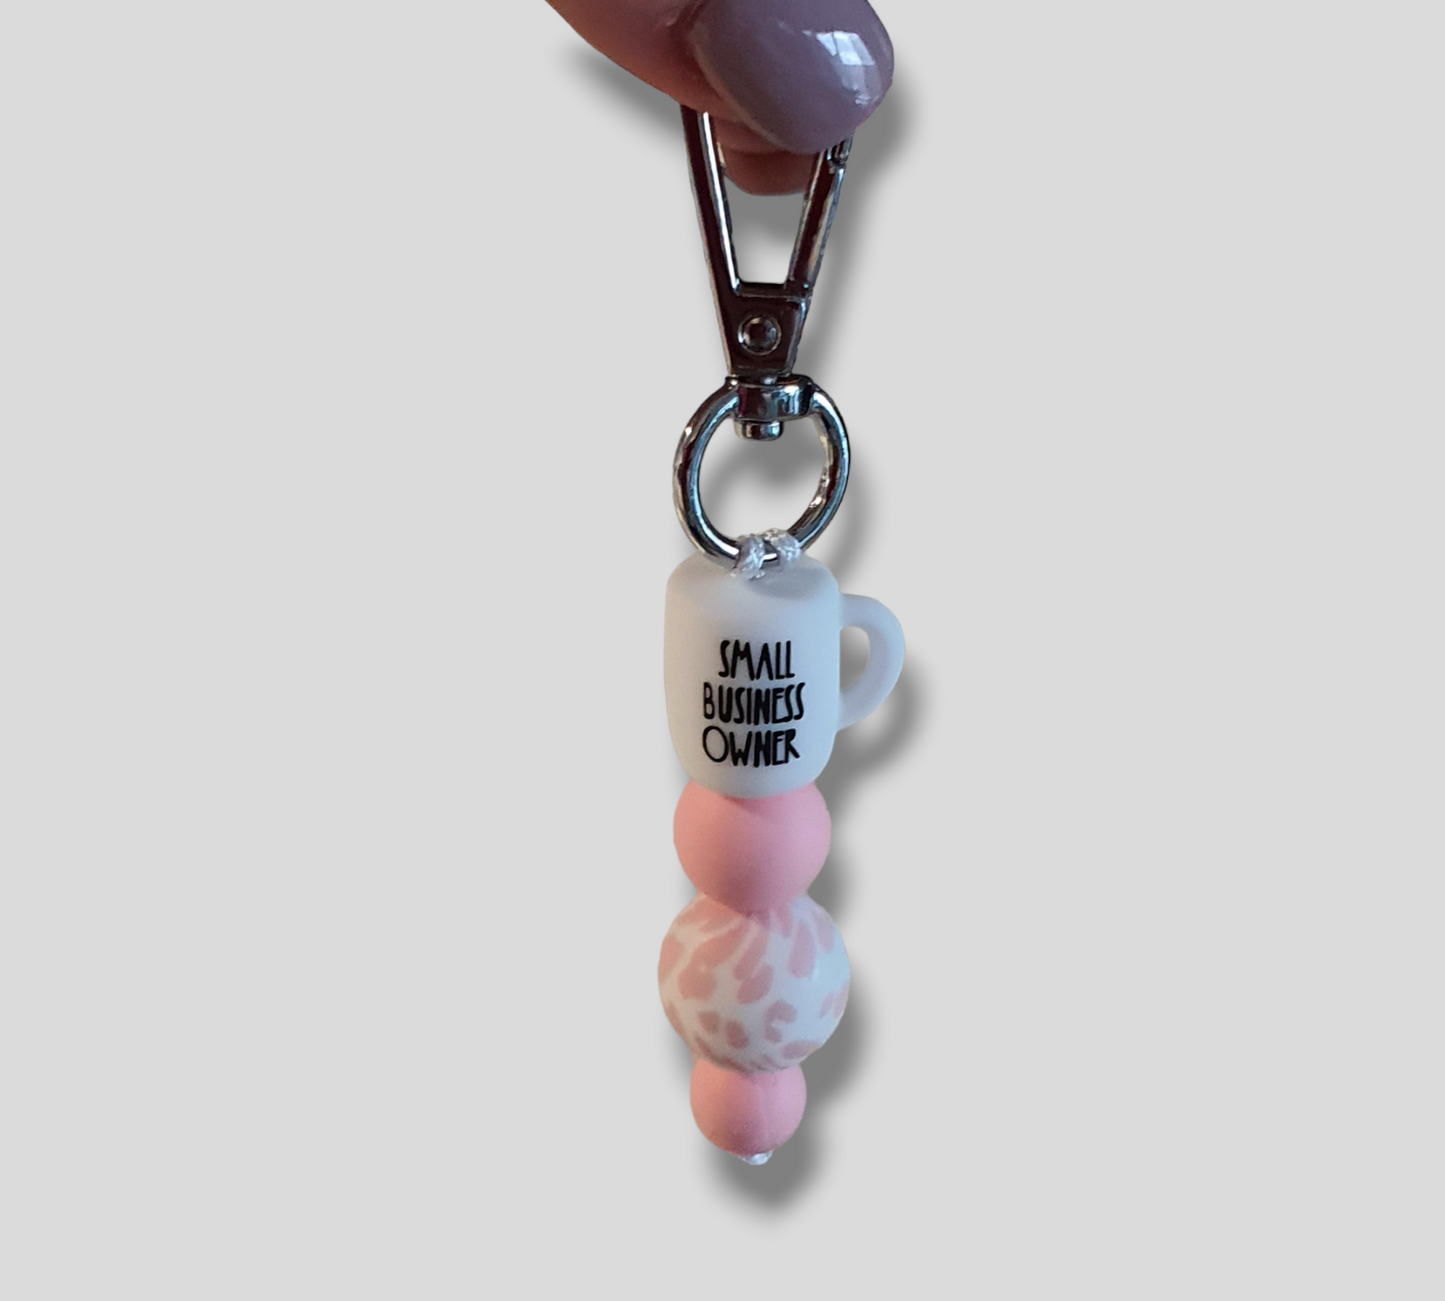 Coffee Mug Keychain or Lanyard | Small Business Owner - PeppaTree Design Store